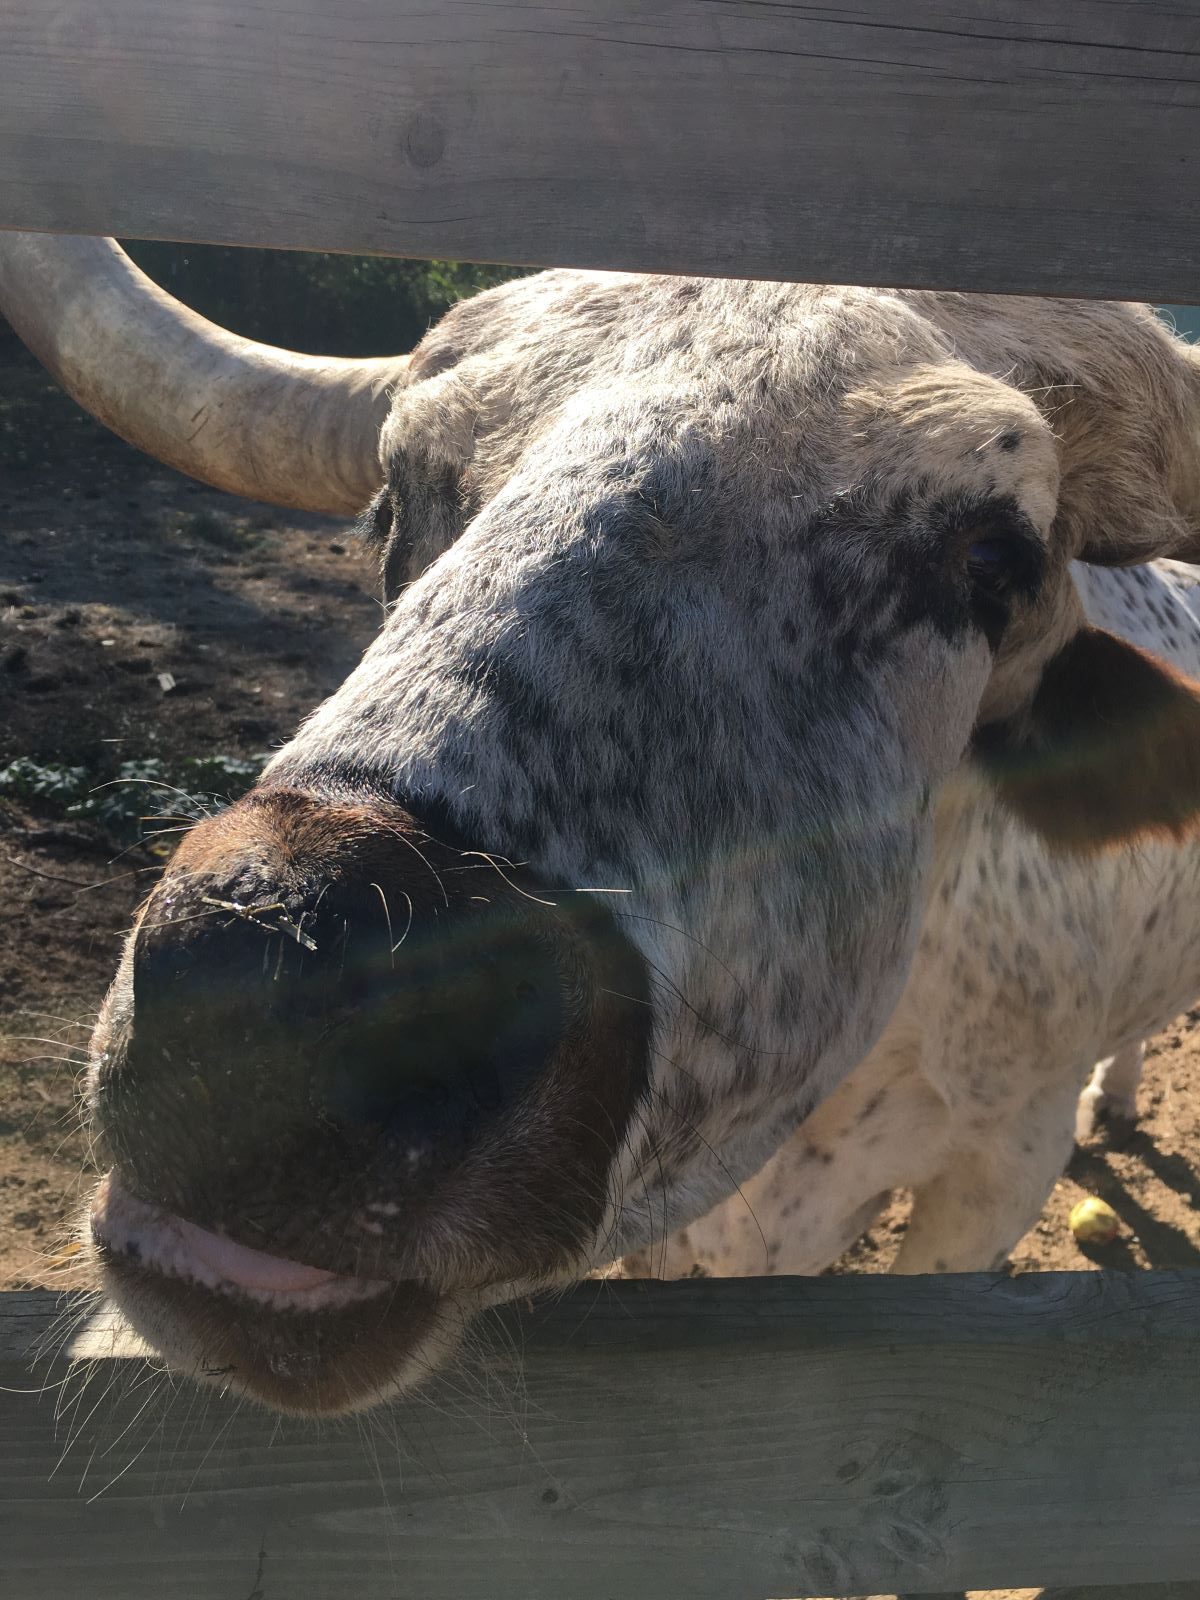 Carlos the Steer at Mt View Orchards